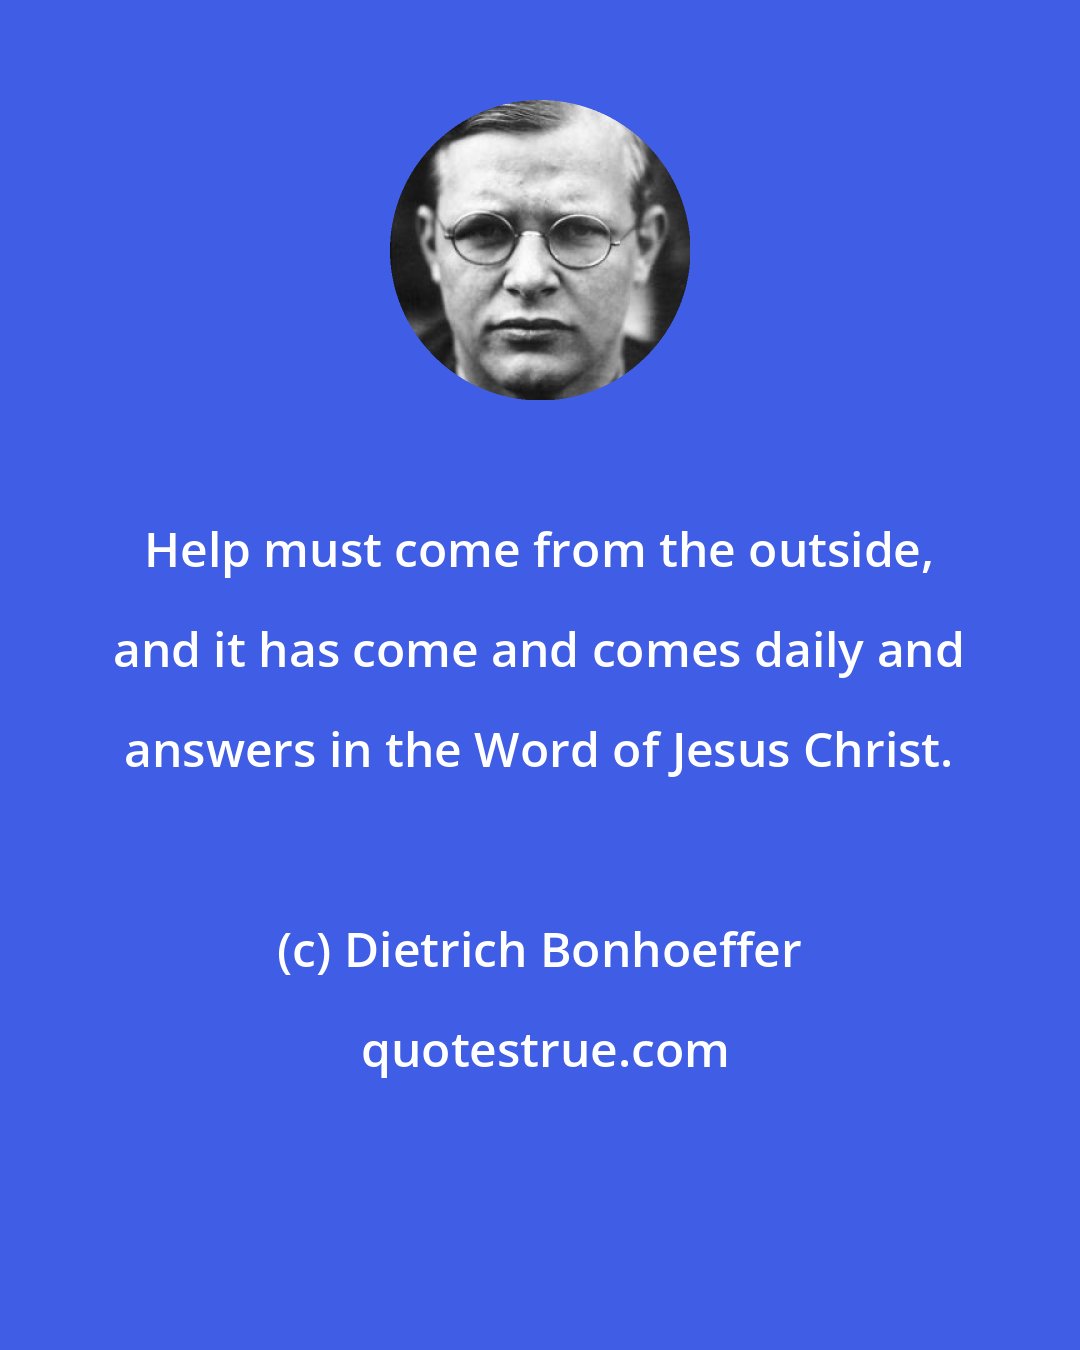 Dietrich Bonhoeffer: Help must come from the outside, and it has come and comes daily and answers in the Word of Jesus Christ.